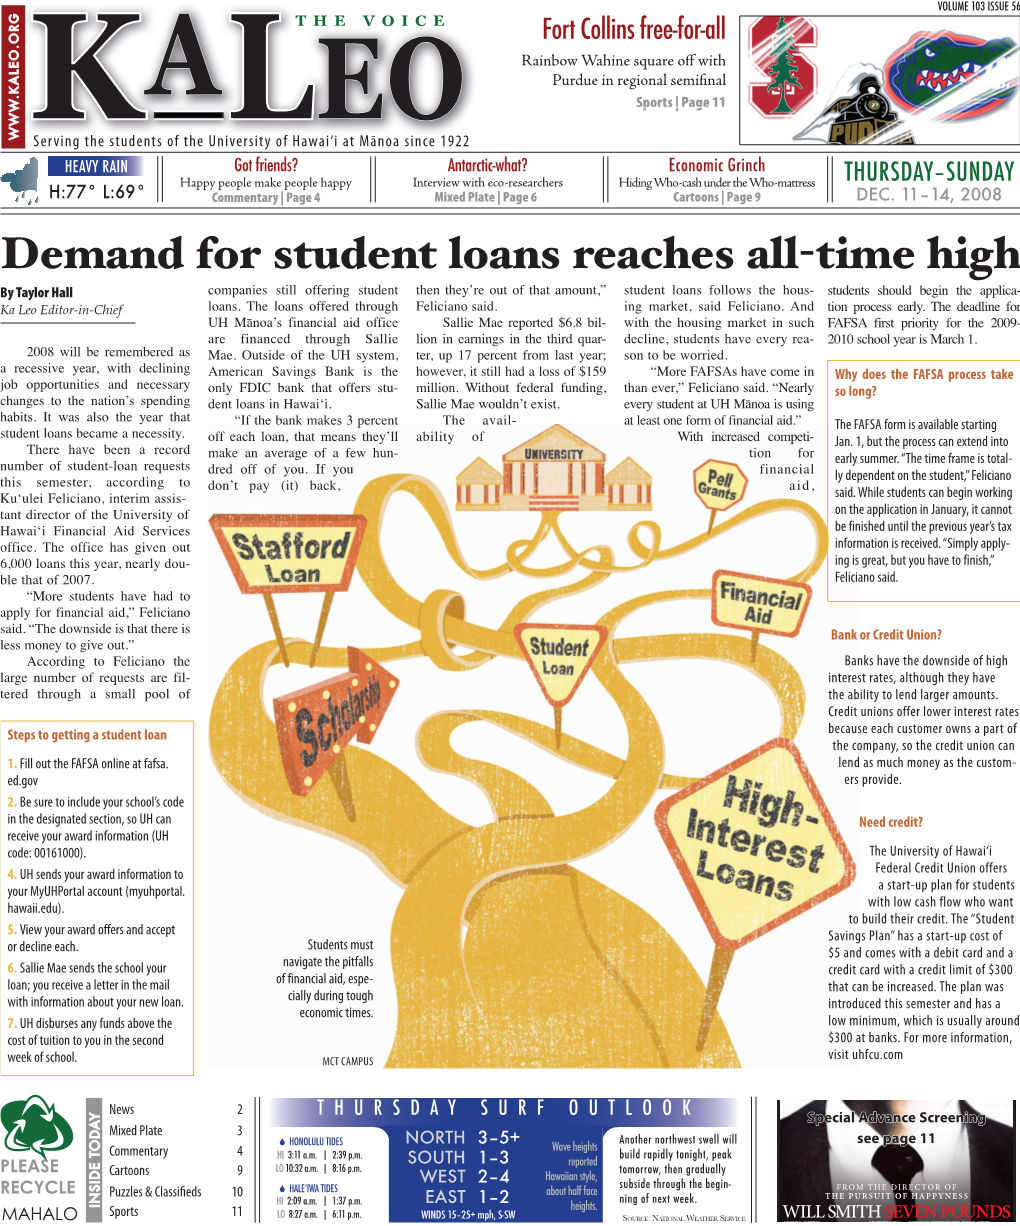 Demand for Student Loans Reaches All-Time High